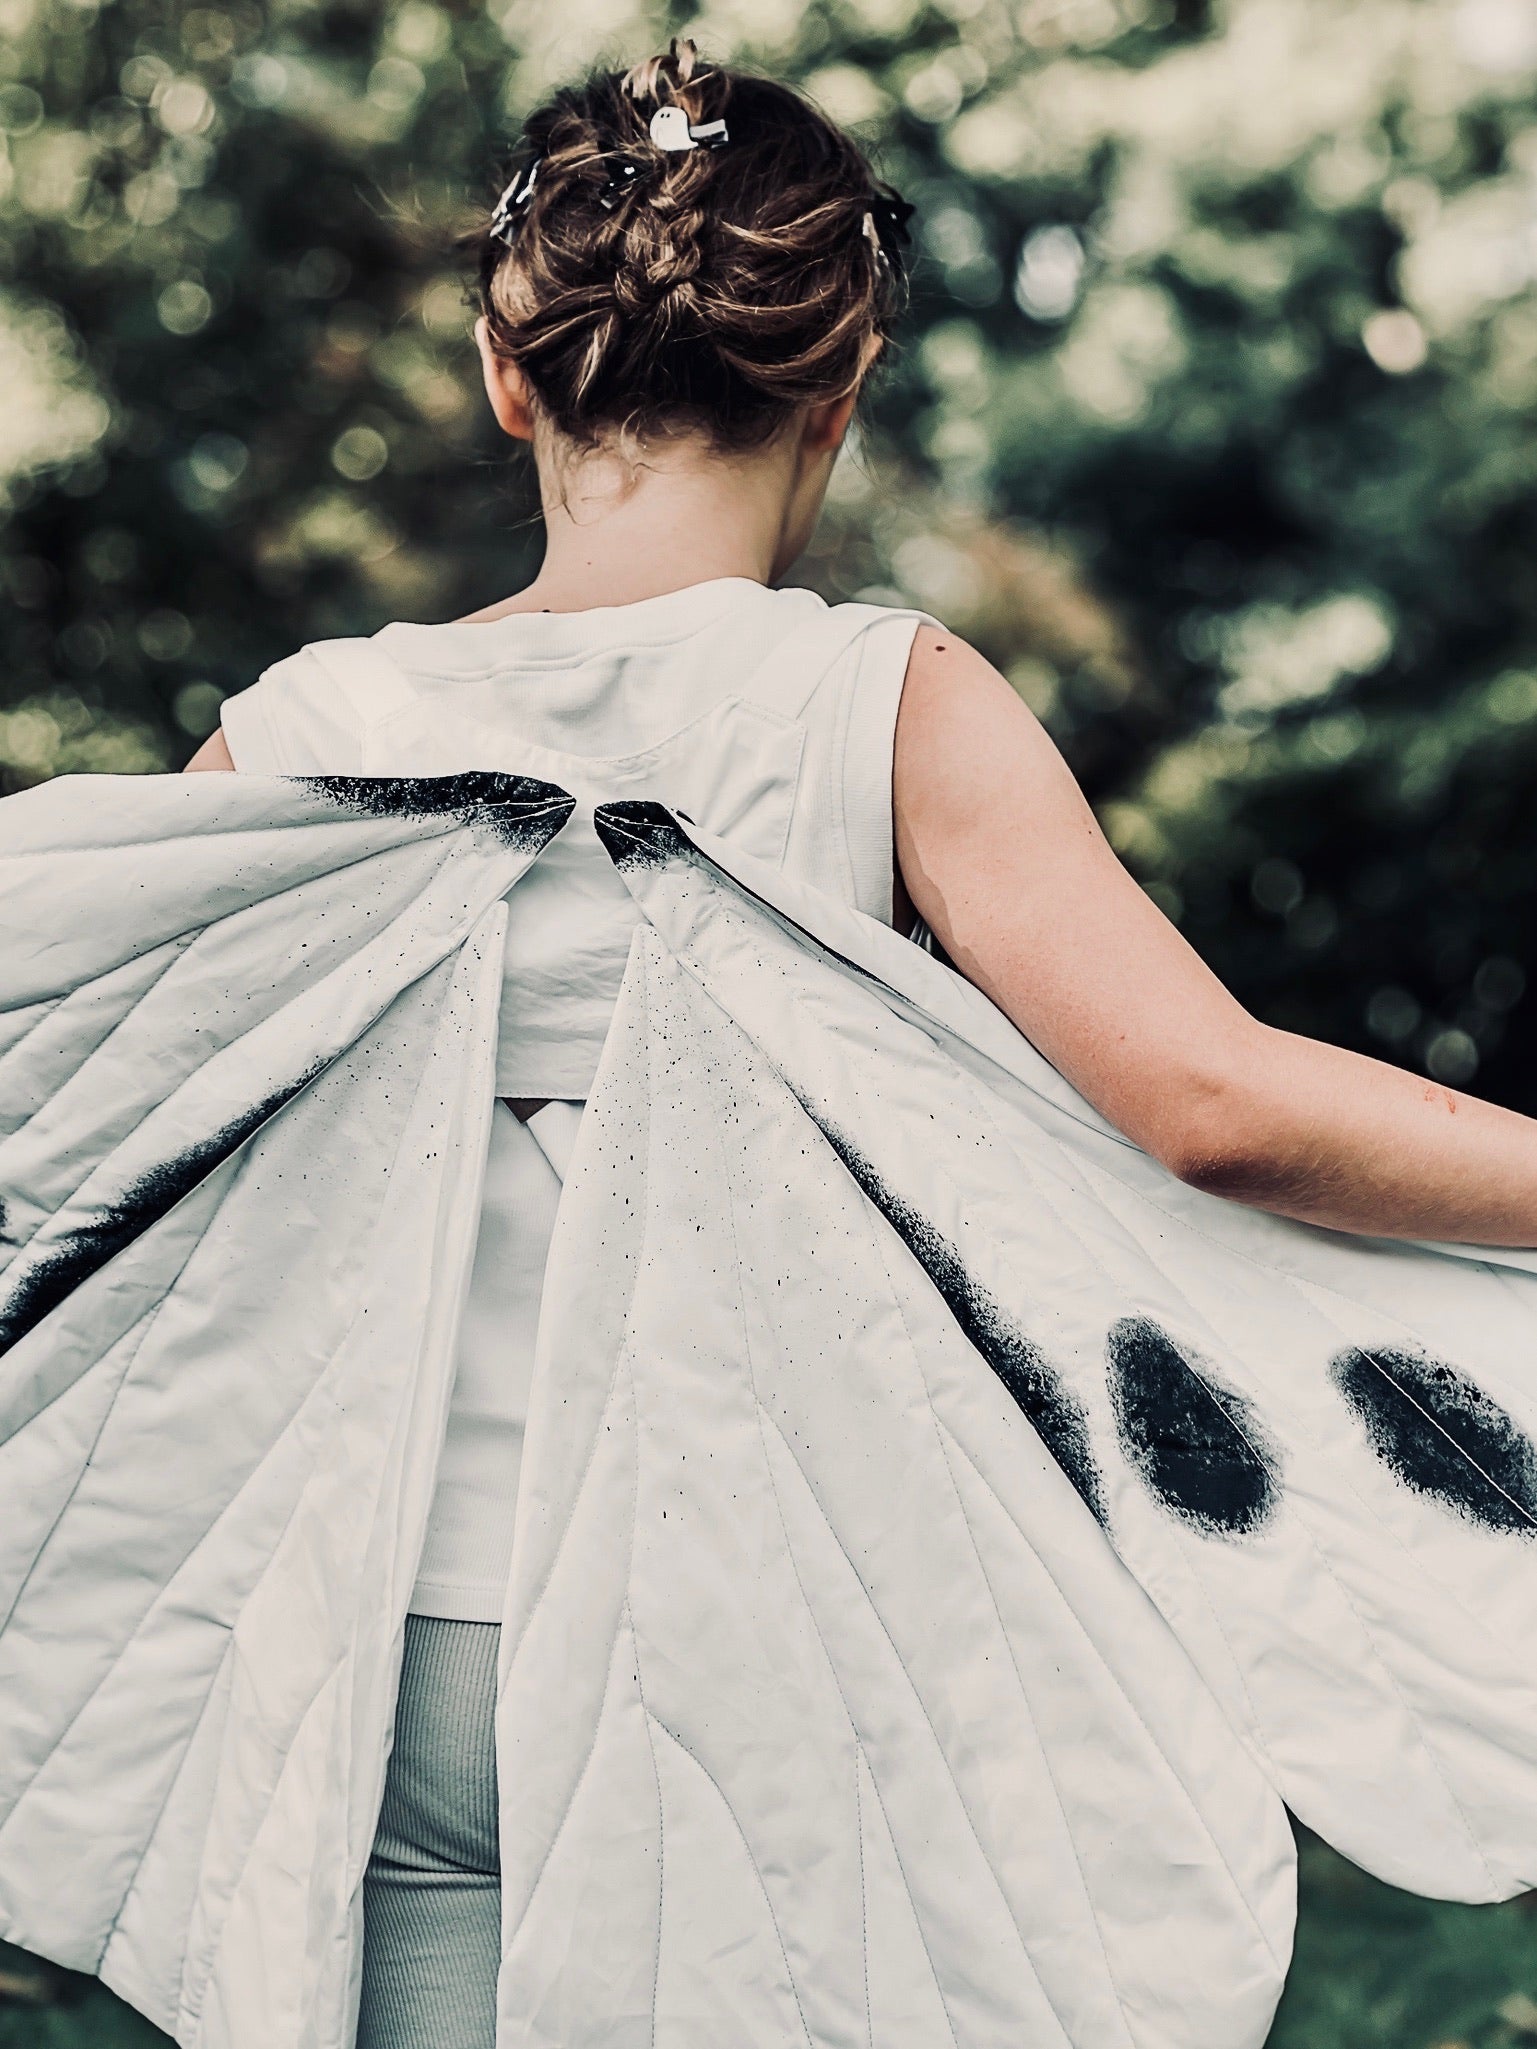 Back view of a girls wearing Butterfly wings